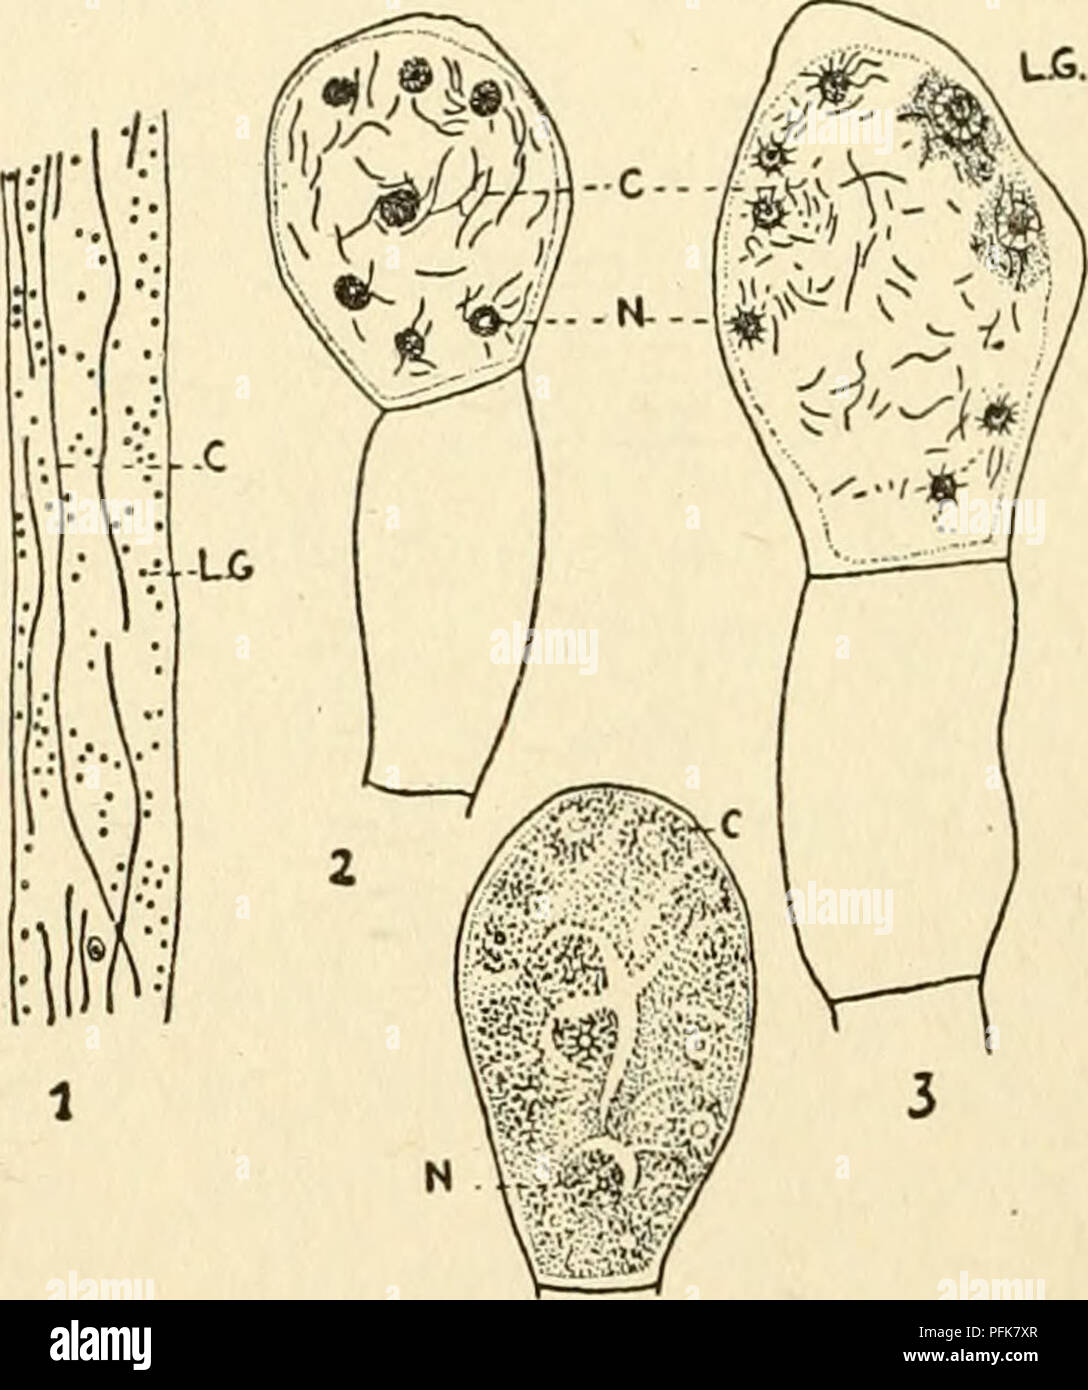 . The cytoplasm of the plant cell. Plant cells and tissues; Protoplasm. â 'â â Zy D -A-ii. Fig. 24 (left). â The chondriome in Myxomycetes and the Plasmodiophoraceae. A, frag- ment of the Plasmodium of Physarum (original); B, spores of Fuligo septica (after Lewitsky) ; C, spores of Hemitrichia vesparum (after Cowdry) ; D, spores and zoospores of Fuligo septica (after Vonwiller) ; E, young Plasmodia of Plasmodiophora Brassicae (after Milovidov). Fig. 25 (right). â Allomyces arbiisculus. 1, elongated chondrioconts in the vegetative fila- ment. 2, 3, the chondrioconts grouped about the nuclei in Stock Photo